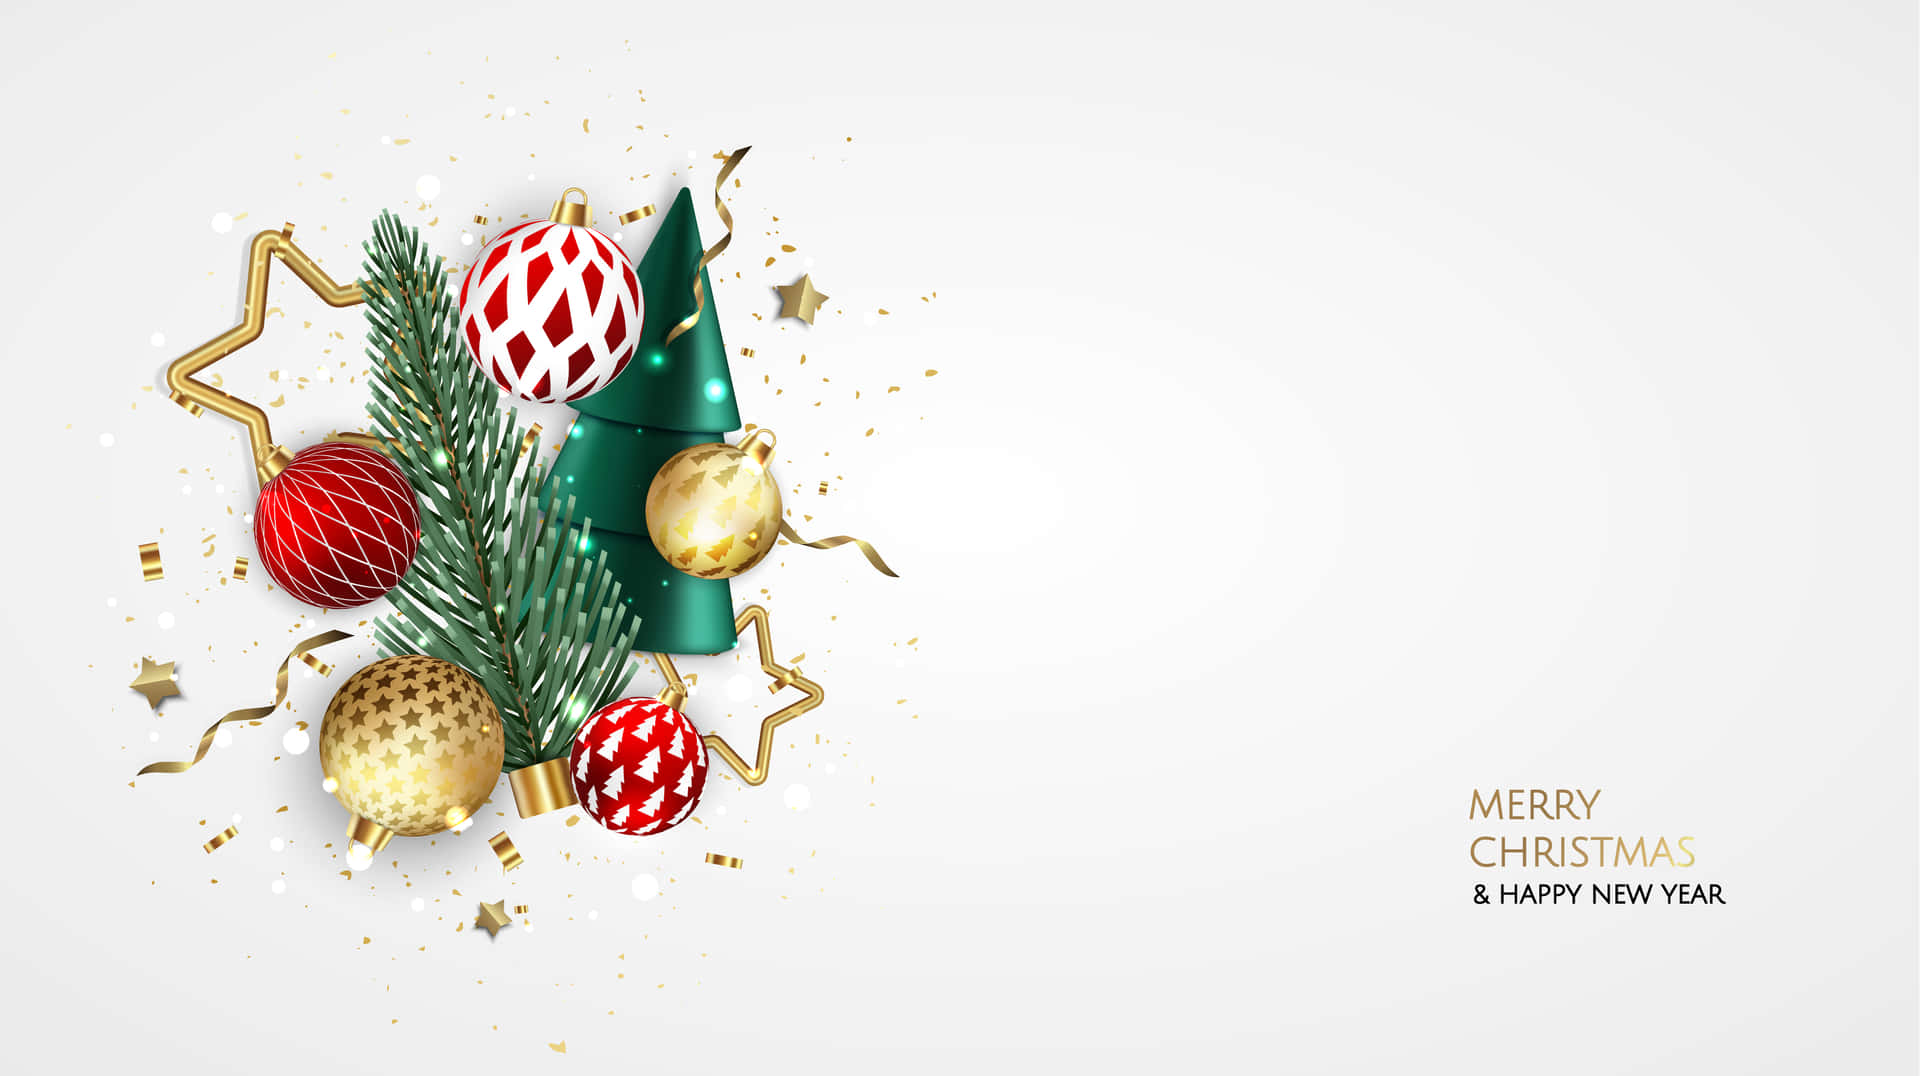 Celebrate in Style with a Festive Background